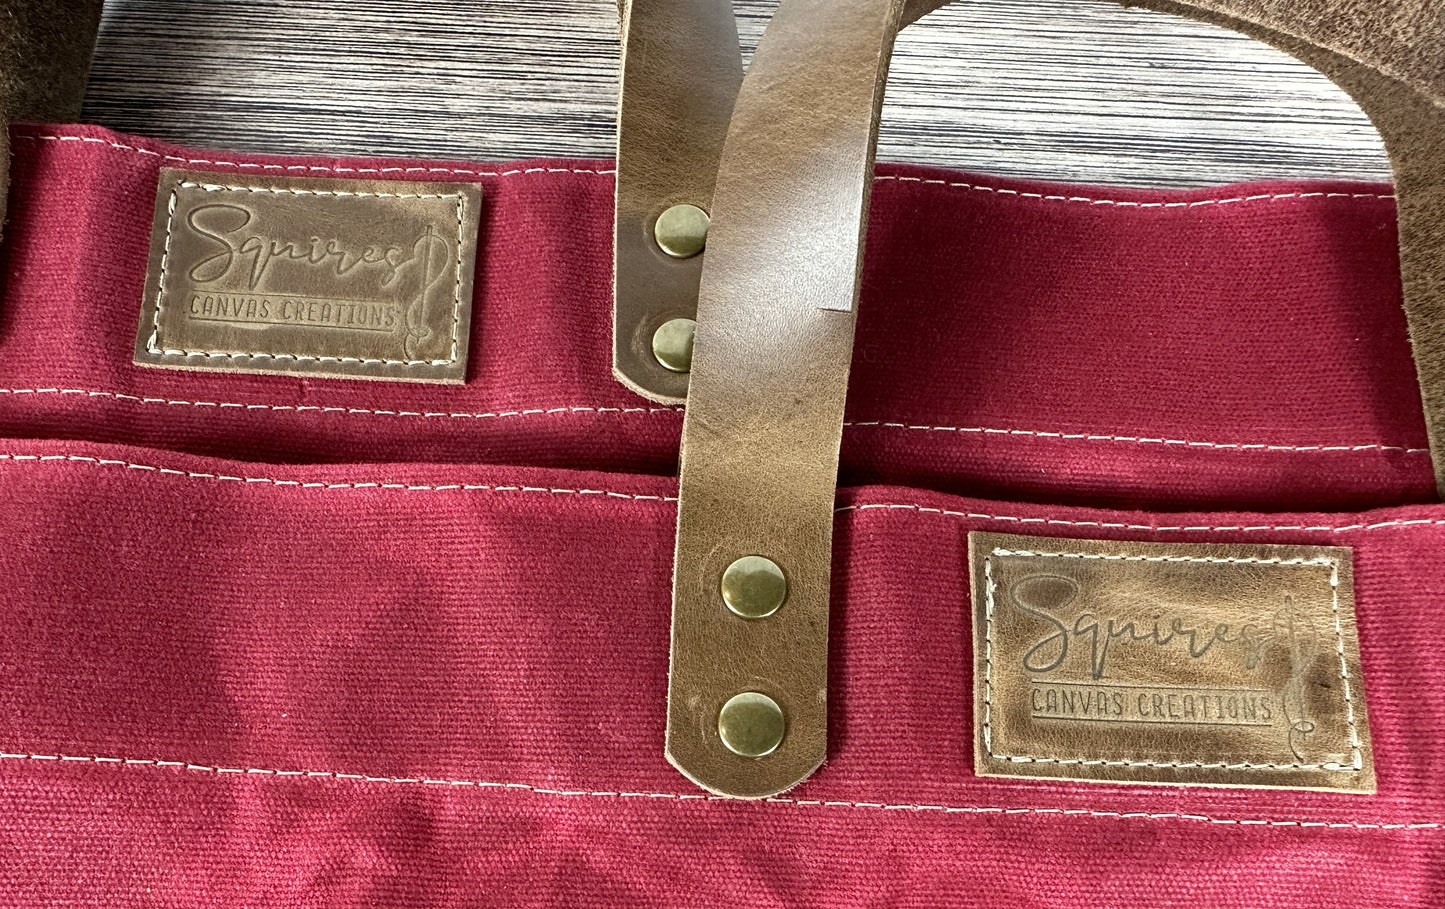 Red Waxed Canvas Wheat Leather with Antique Brass Hardware Chesapeake Market Tote squirescanvascreations